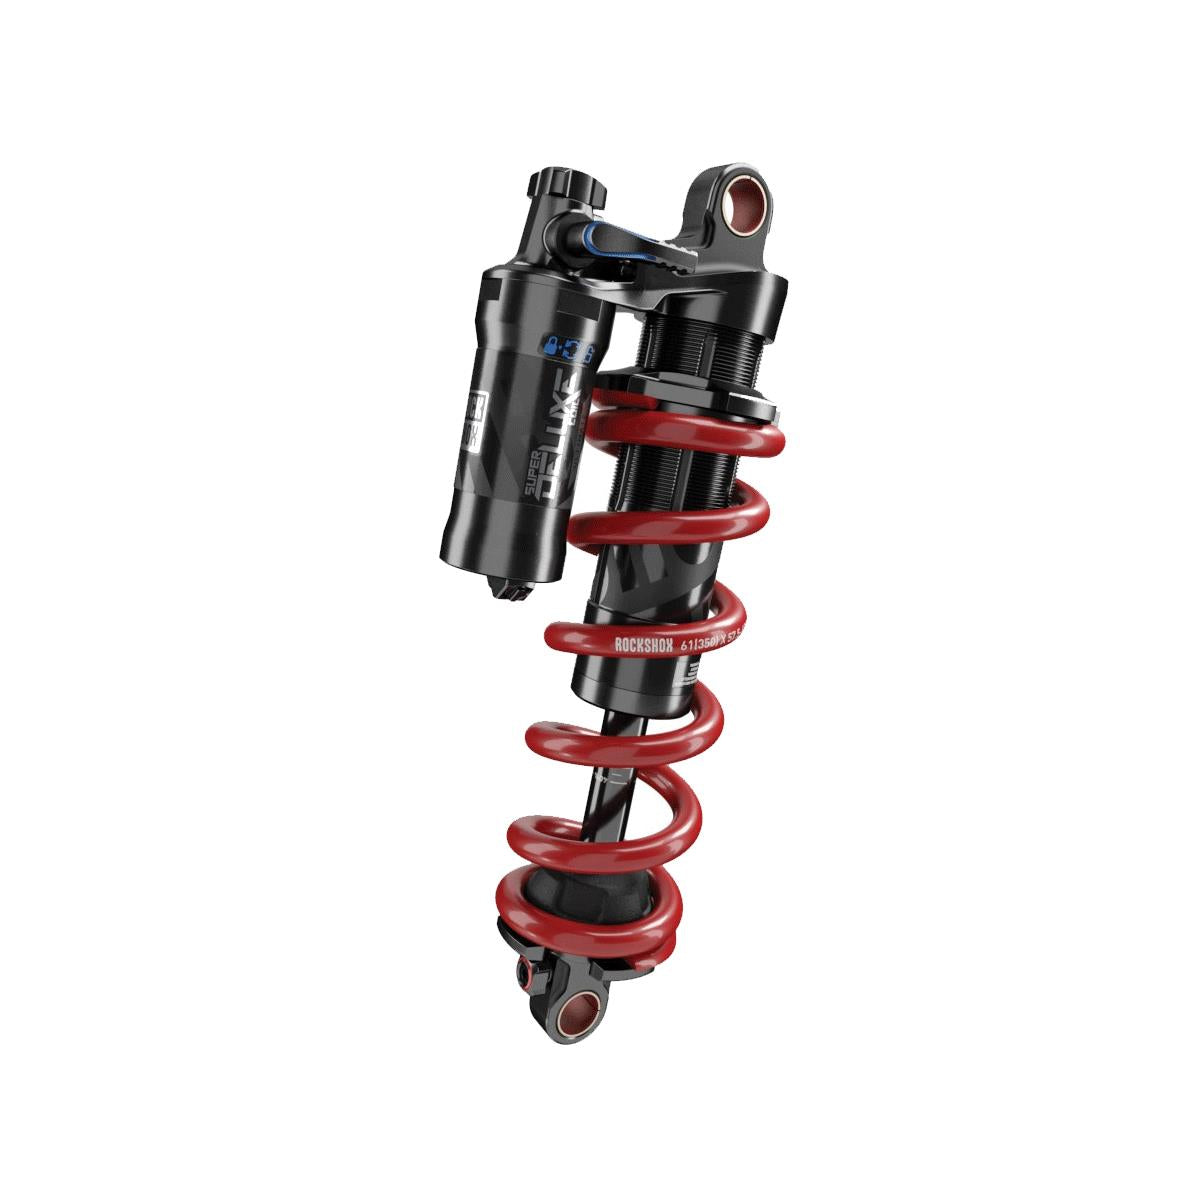 ROCKSHOX REAR SHOCK SUPER DELUXE ULTIMATE COIL RCT (230X65) MREB/LCOMP, 380LB LOCKOUT FORCE, STANDARD, STANDARD (INCLUDES 10X20,10X40 HARDWARE) YT JEFFSY 27.5"